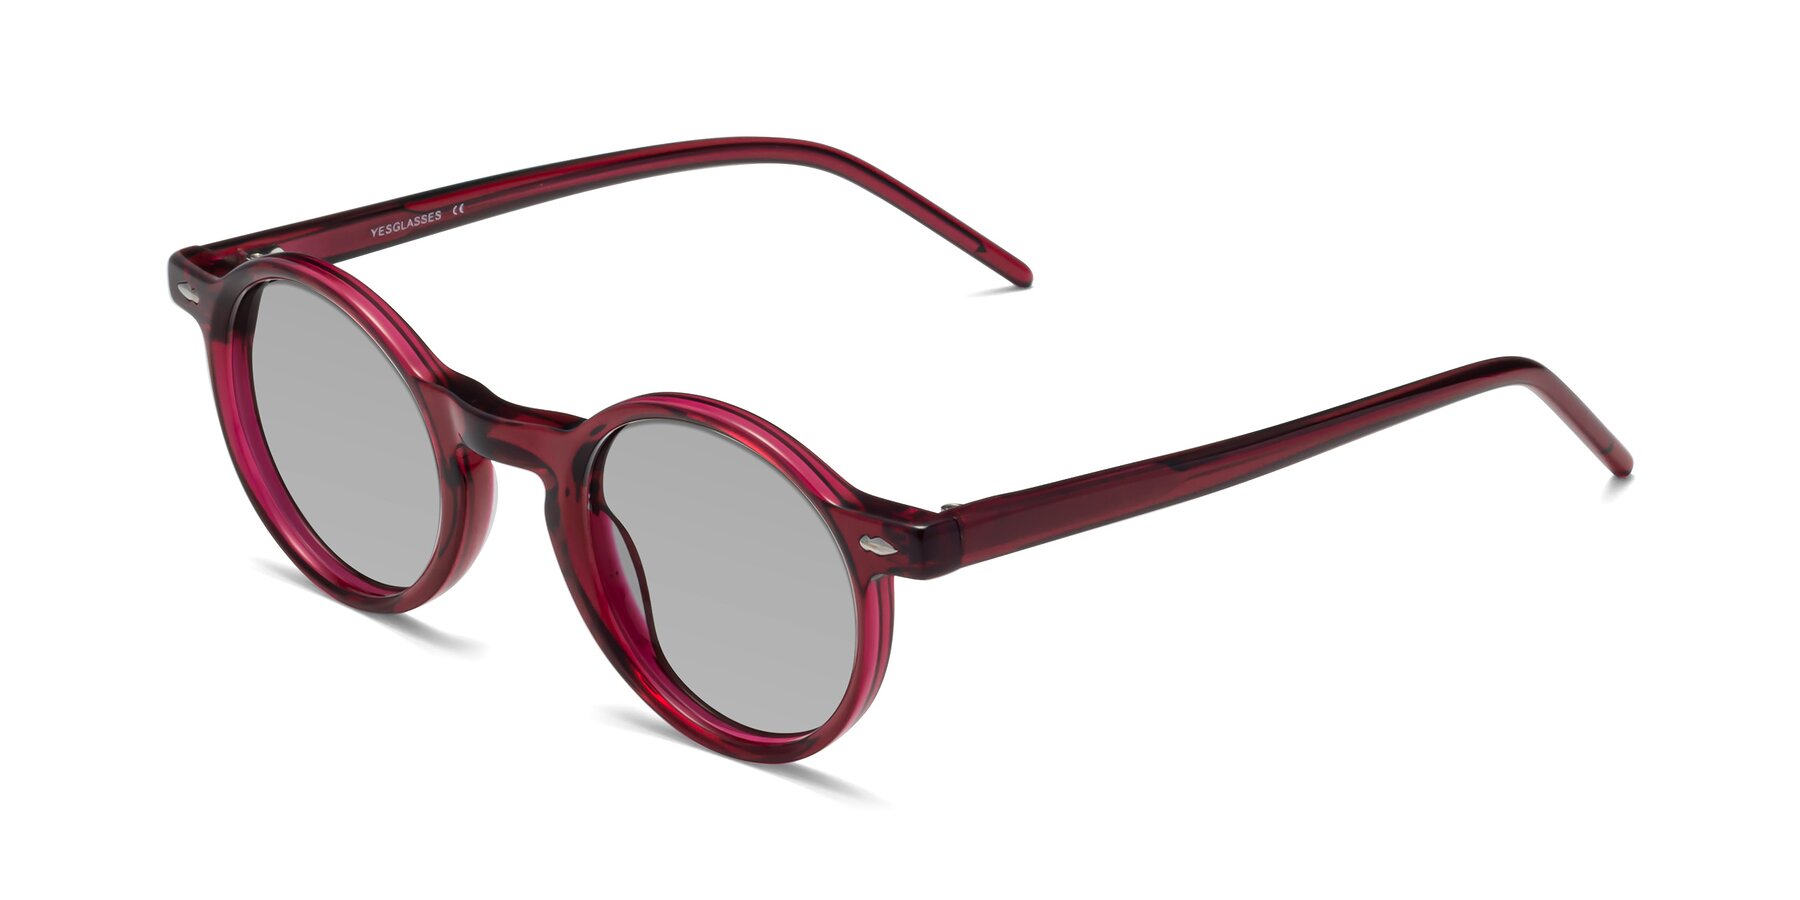 Angle of 1542 in Plum with Light Gray Tinted Lenses